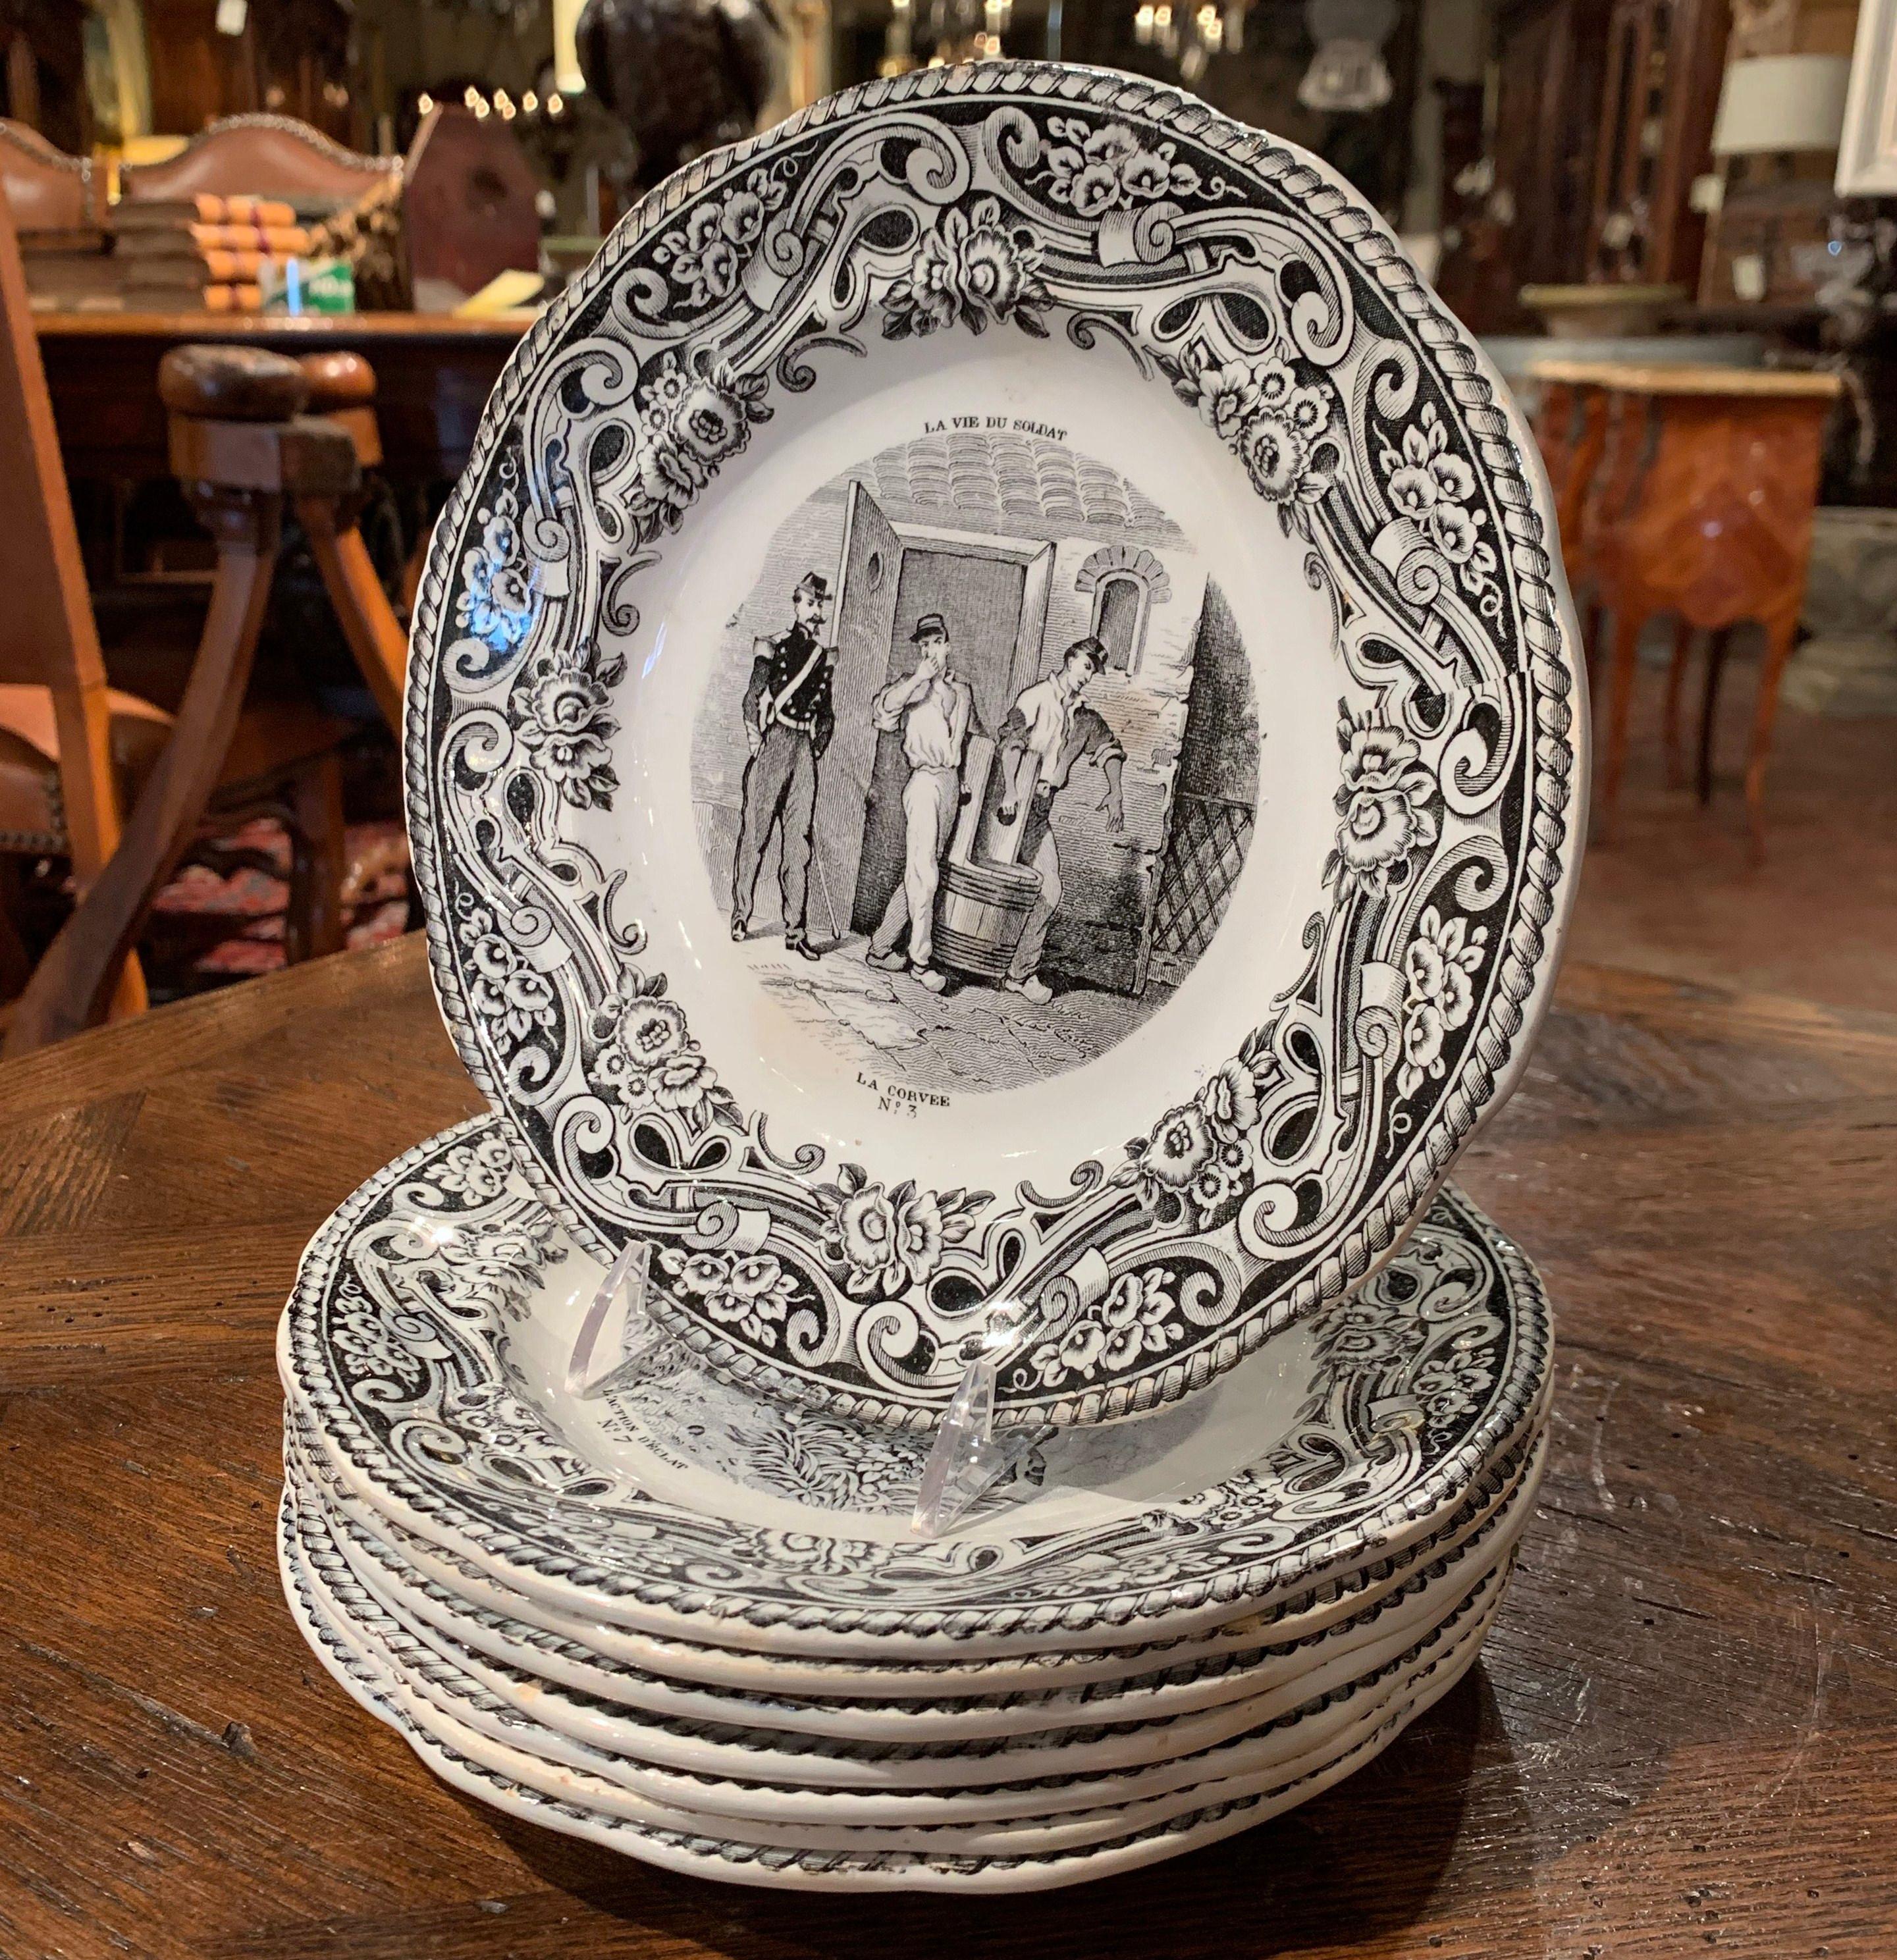 This elegant set of eight antique plates was crafted in France, circa 1870. Each hand painted plate with French wording illustrates a scene depicting the 